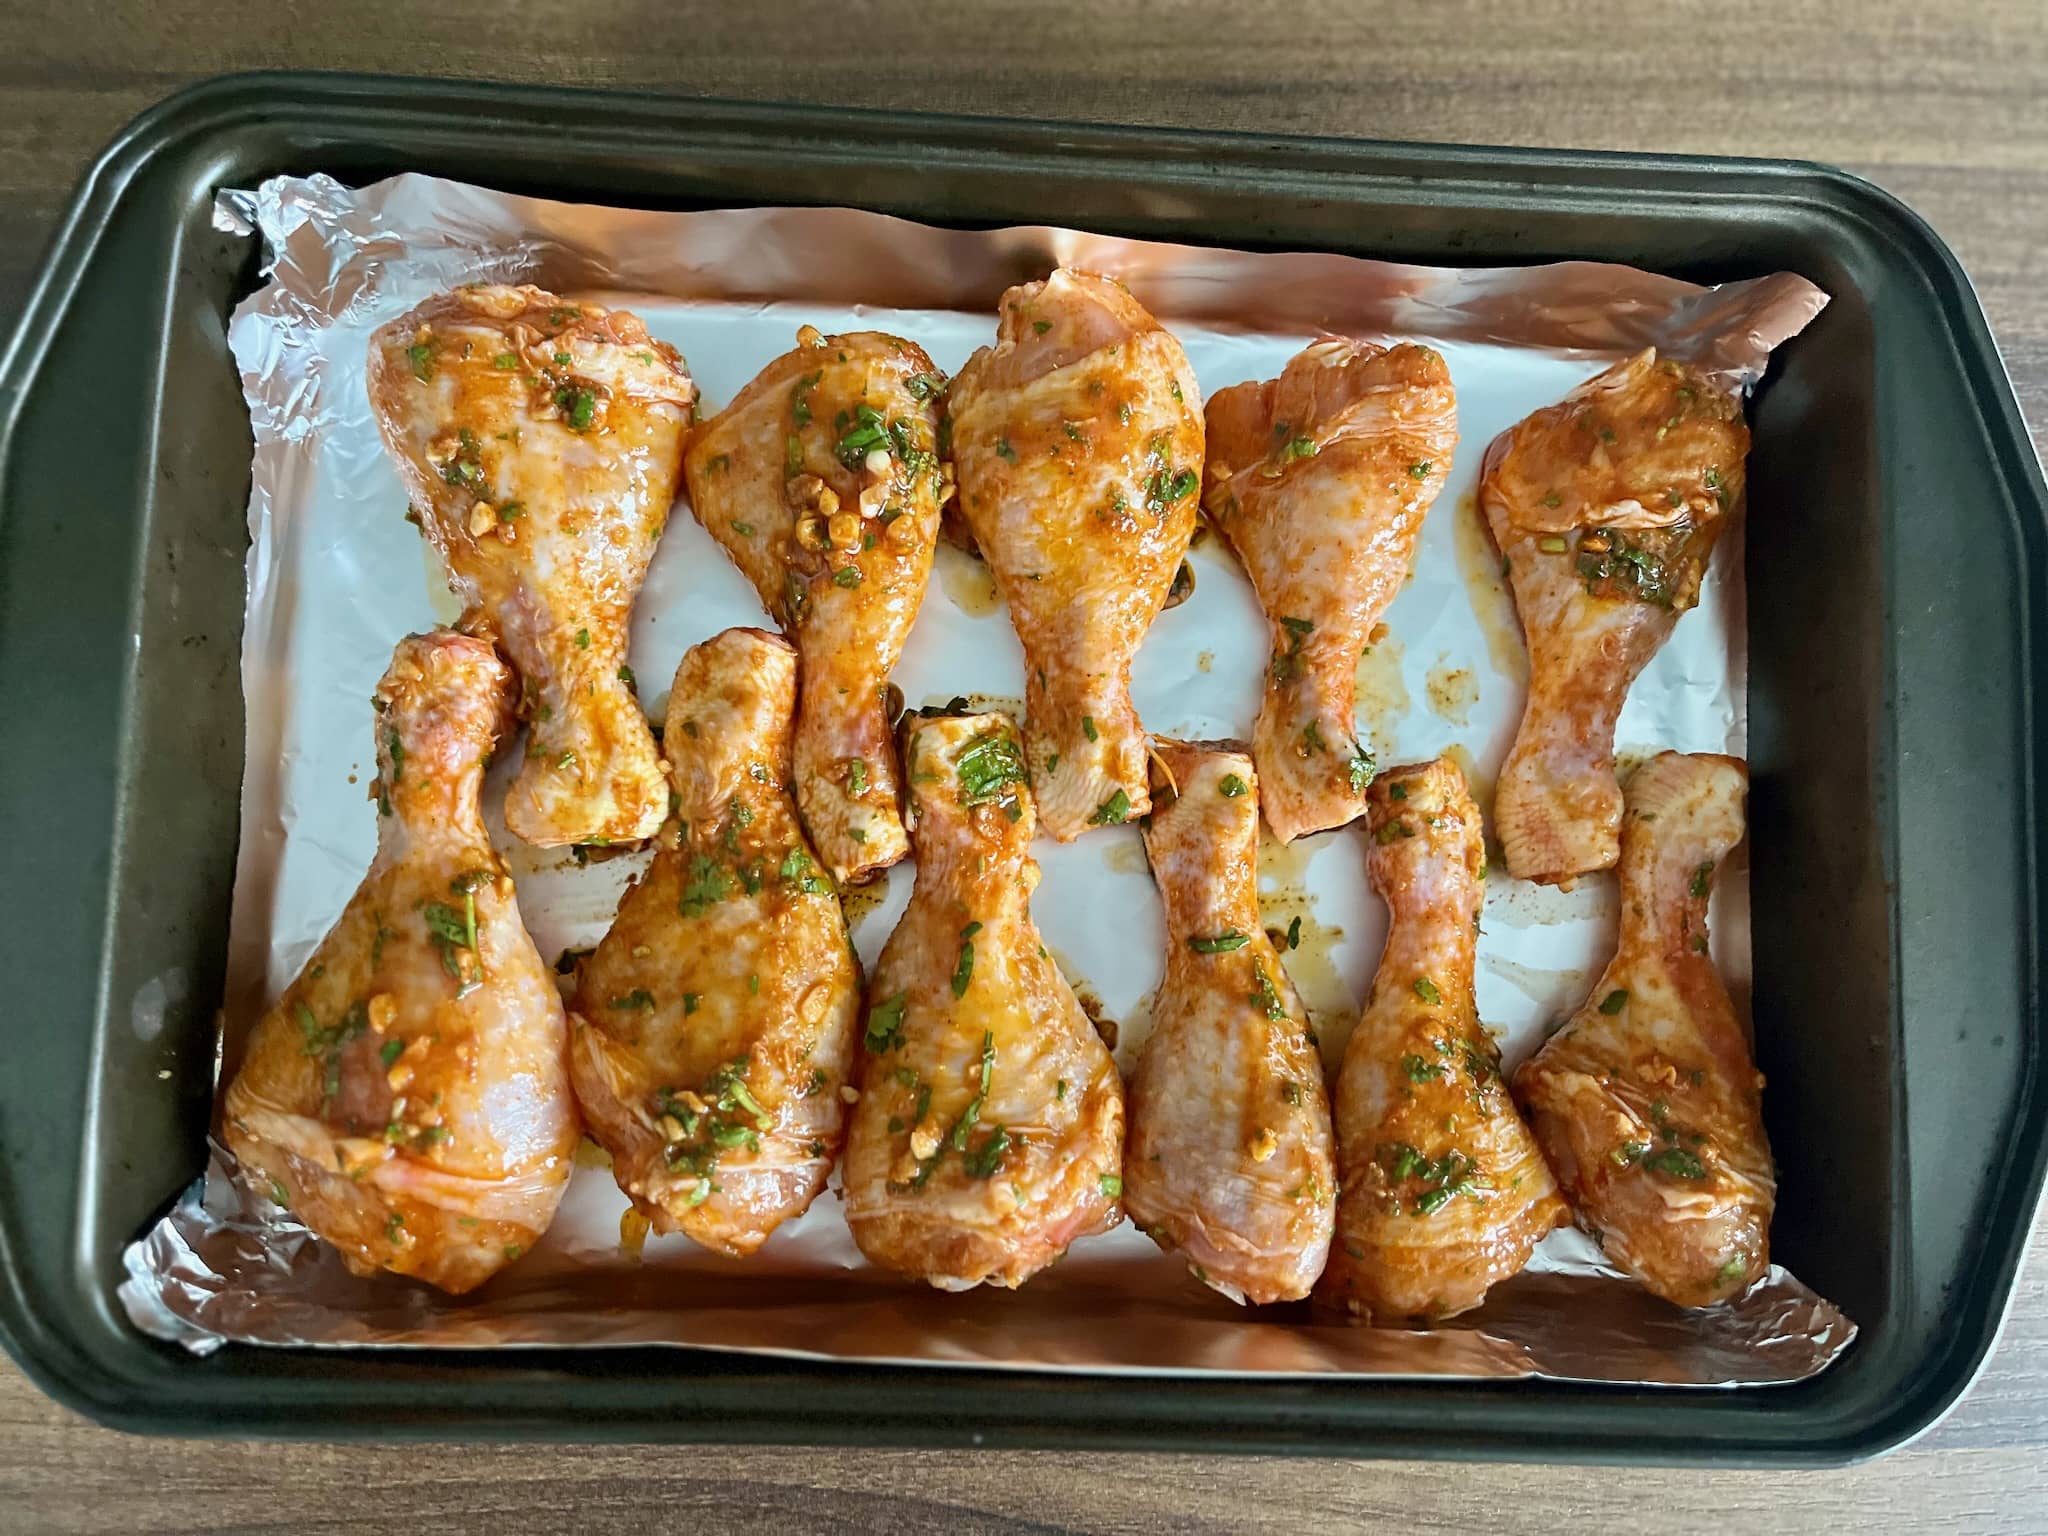 Chicken drumstick in a tray coated with Mexican-style marinade